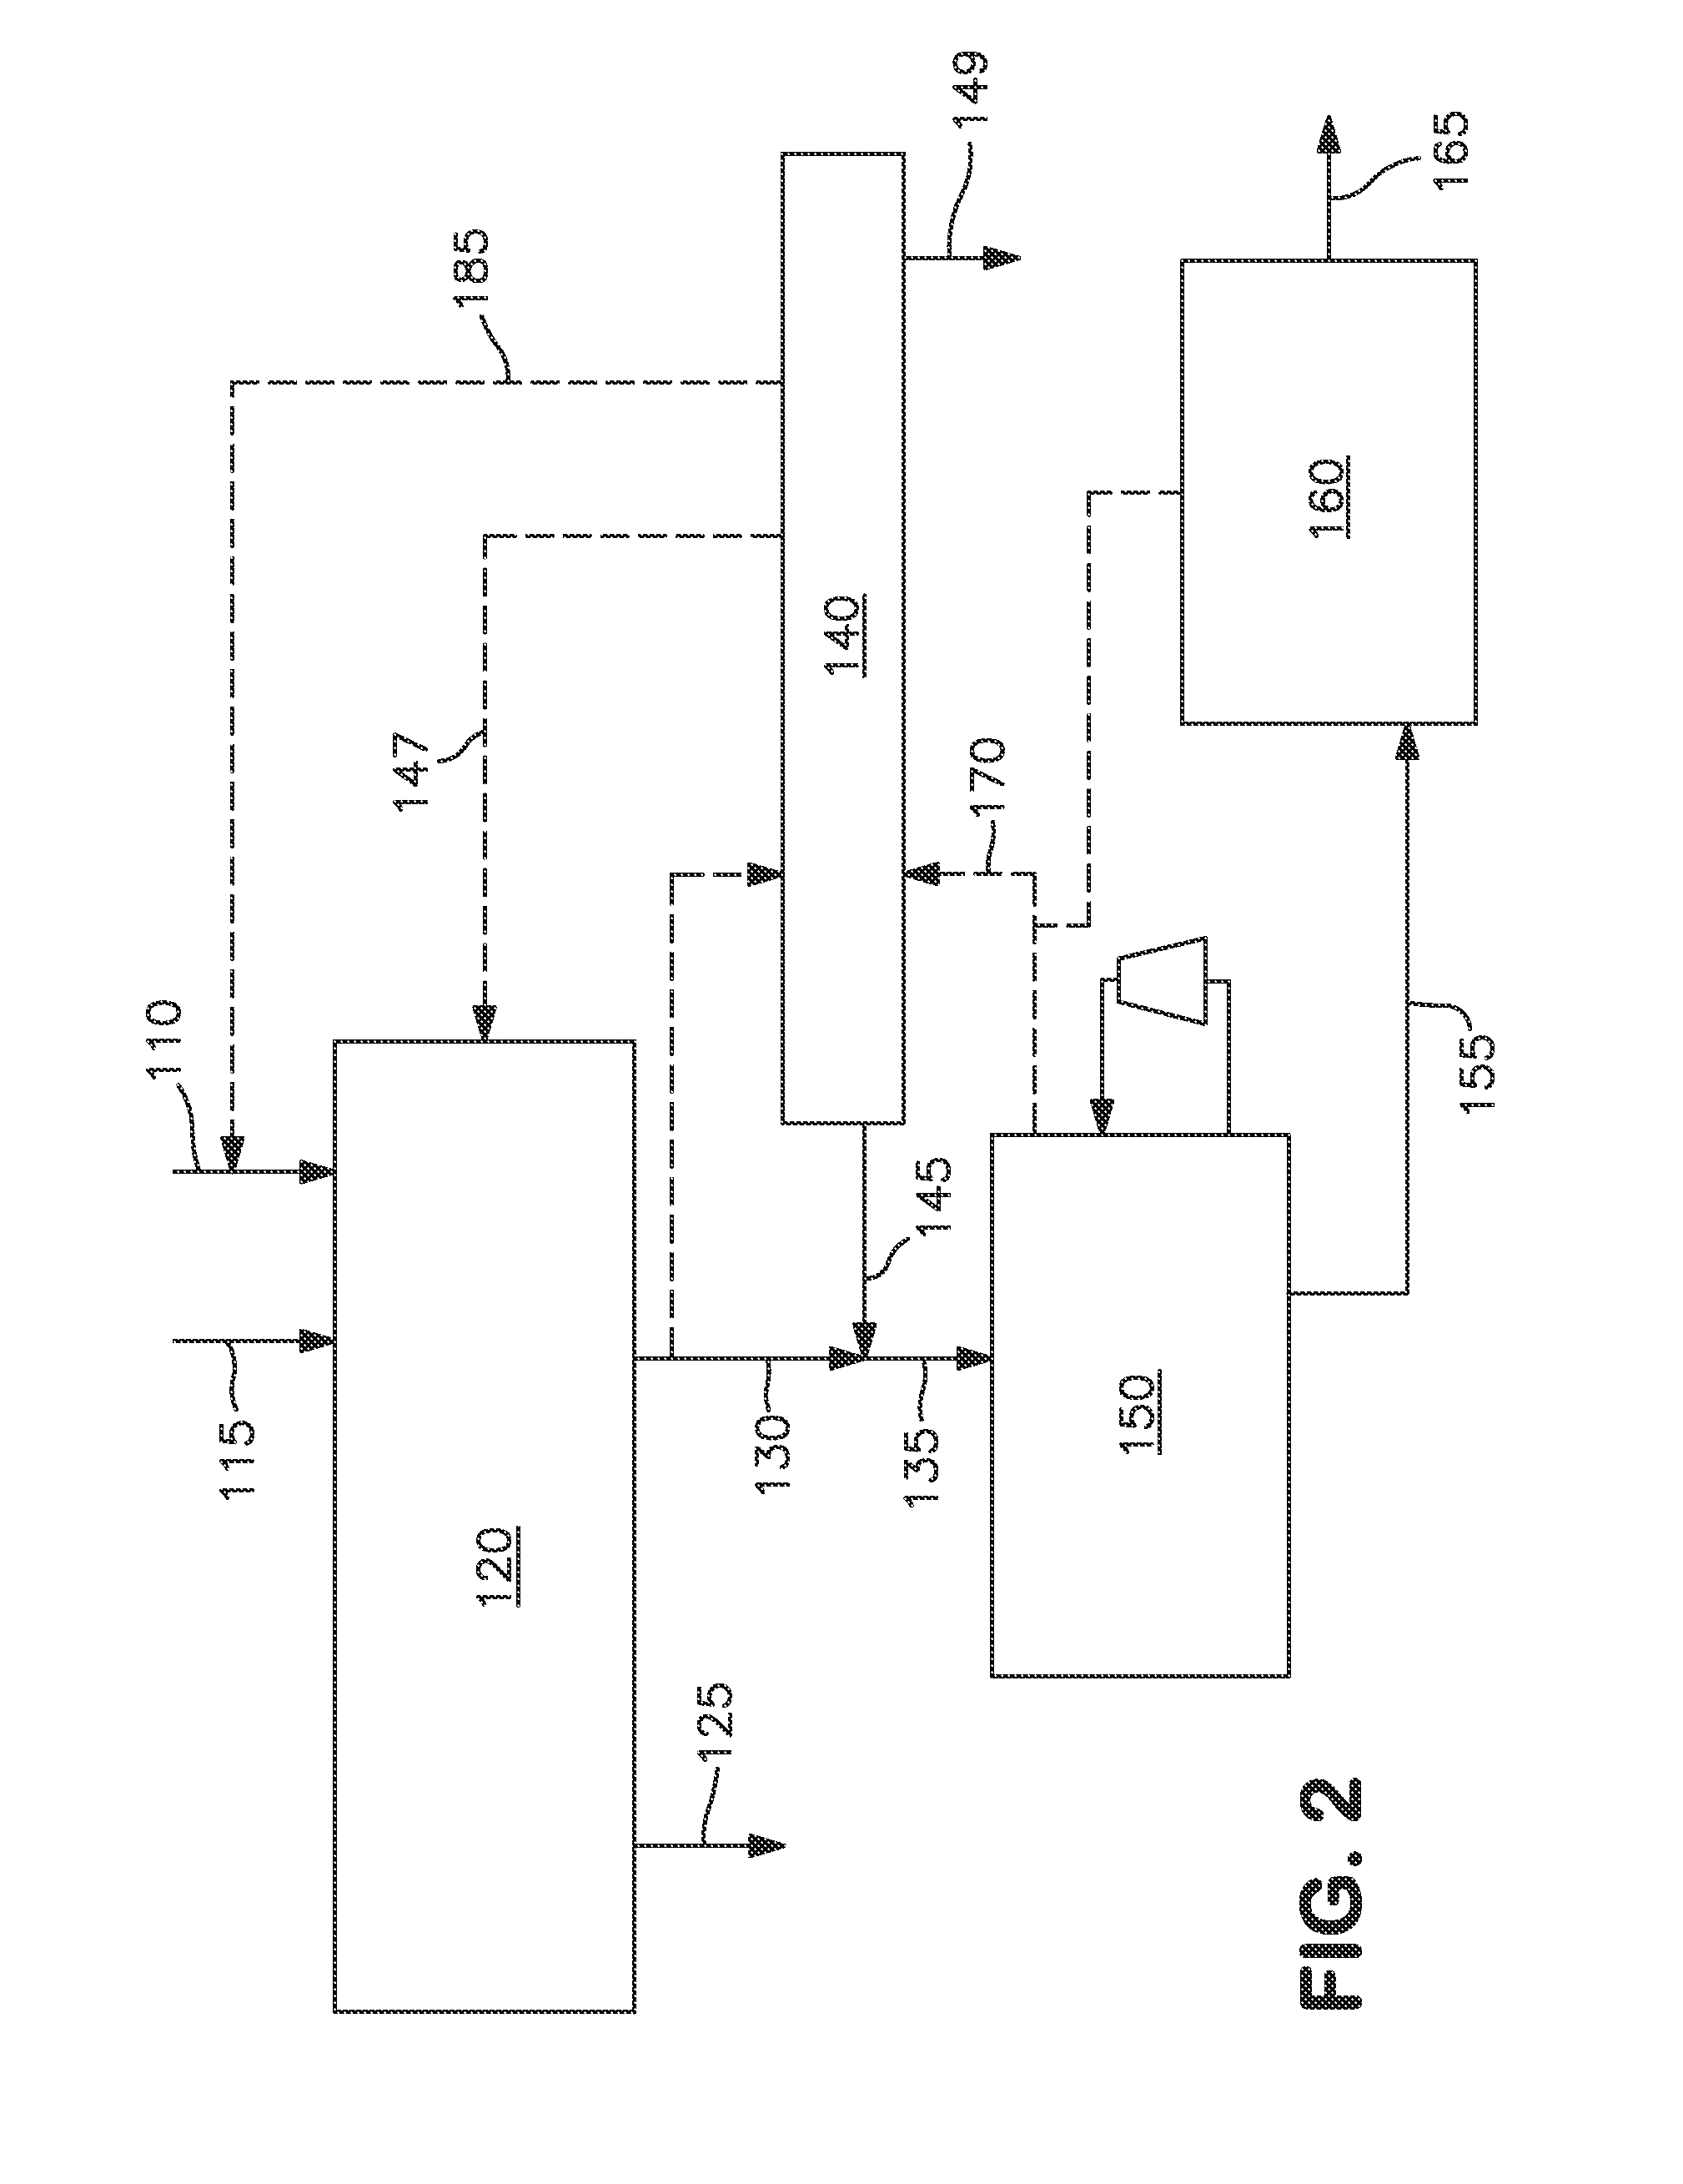 Method and system for producing methanol using an integrated oxygen transport membrane based reforming system